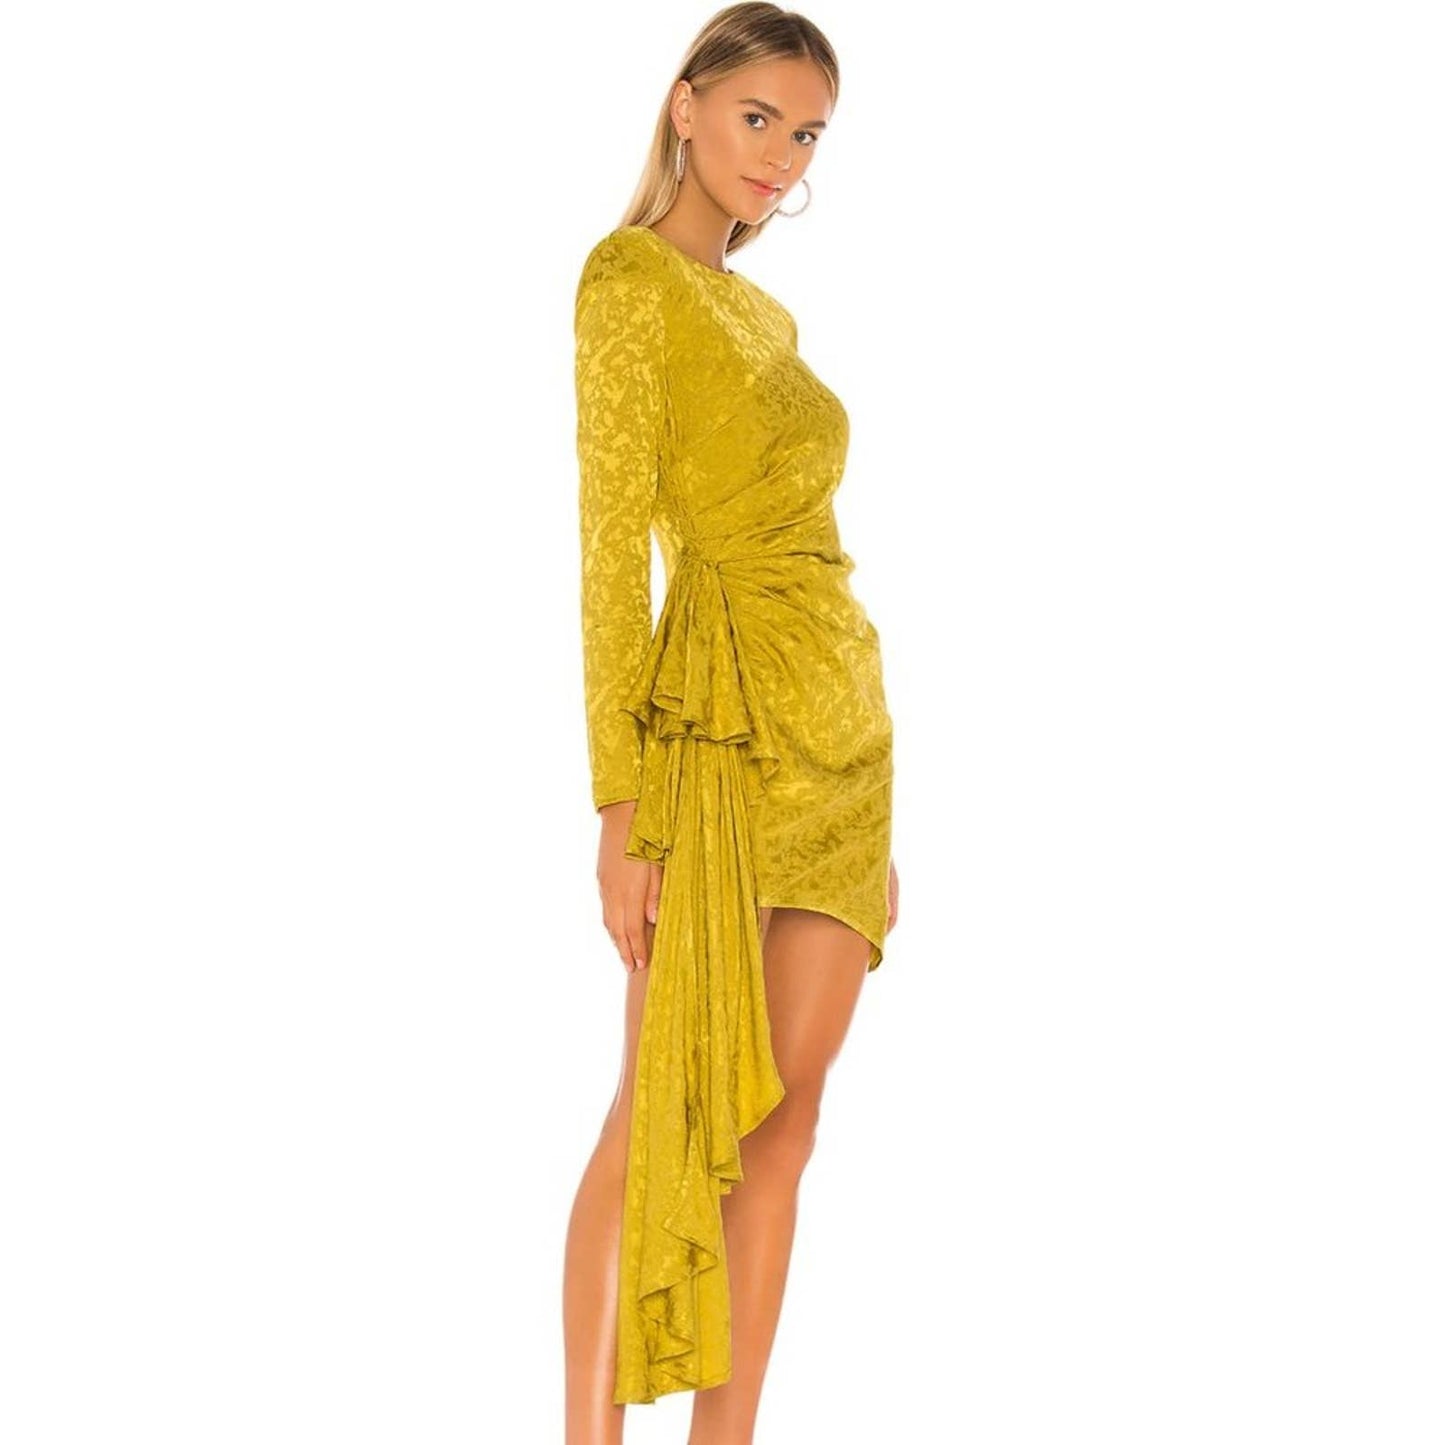 Lovers and Friends Matilda Mini Dress in Citron Green NWT Size Small